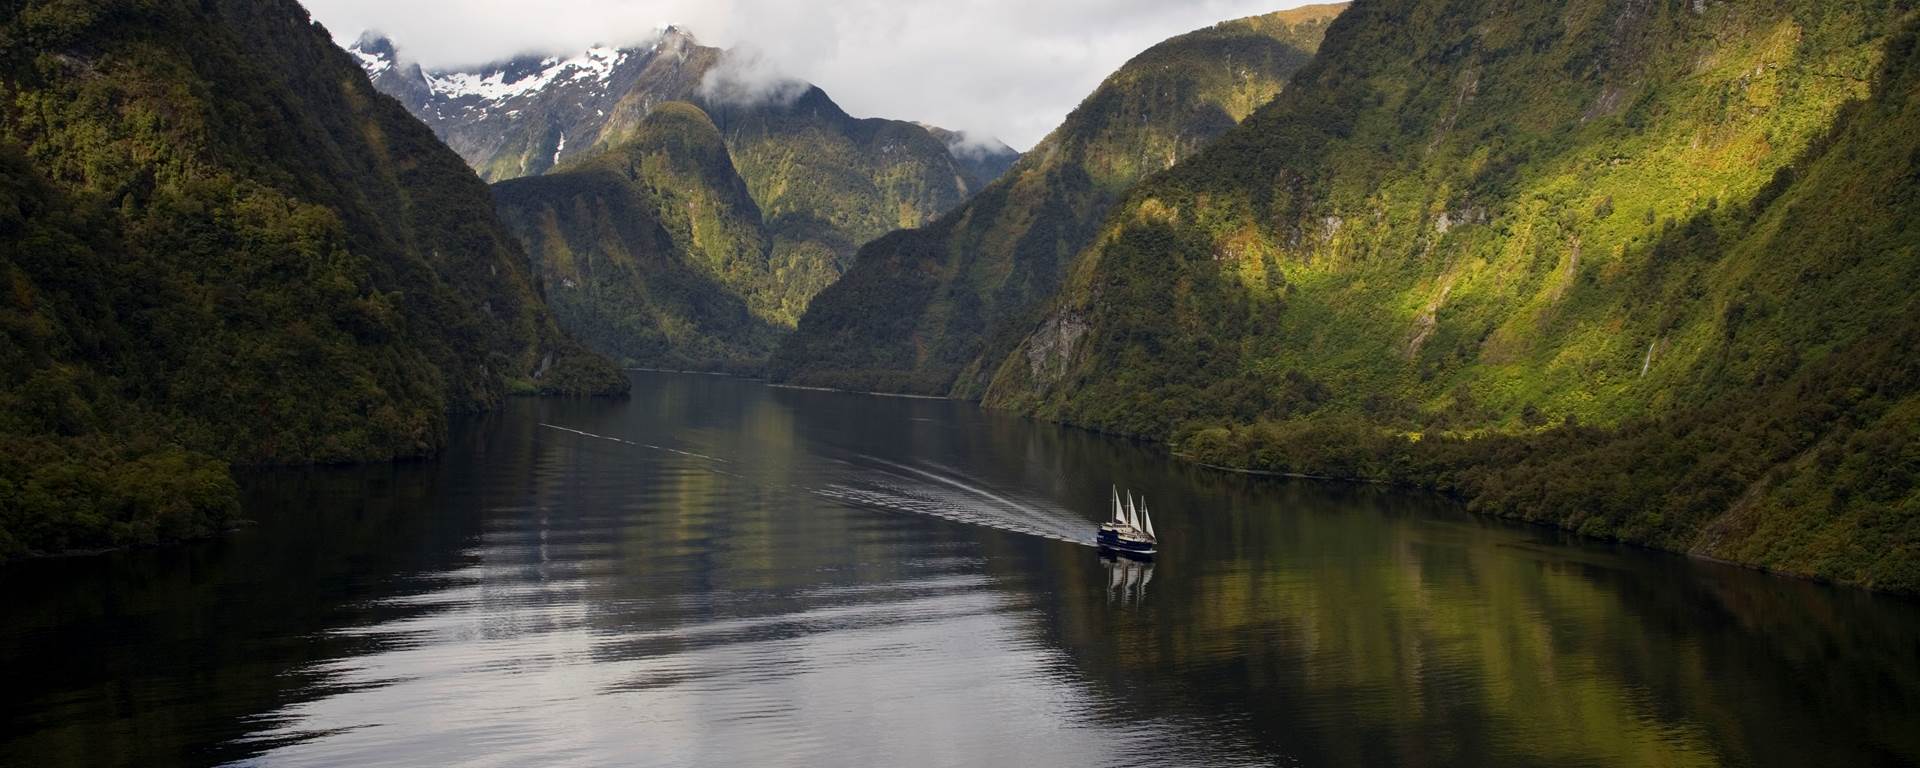 Boat sailing on the still waters of Doubtful Sound surrounded by lush mountains